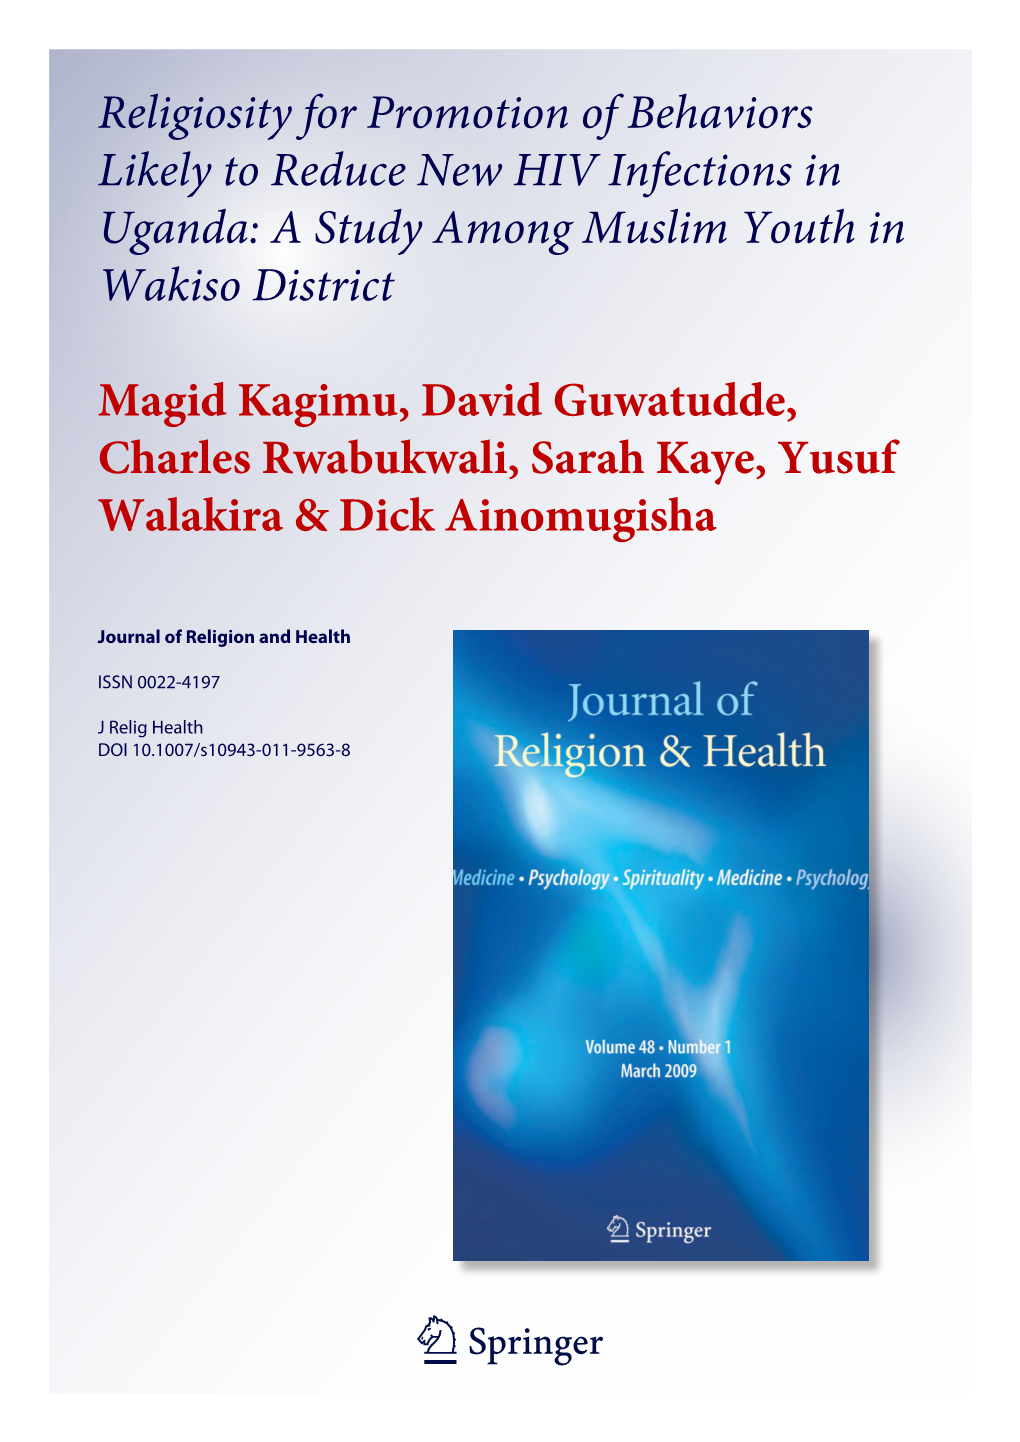 Religiosity for Promotion of Behaviors Likely to Reduce New HIV Infections in Uganda: a Study Among Muslim Youth in Wakiso District